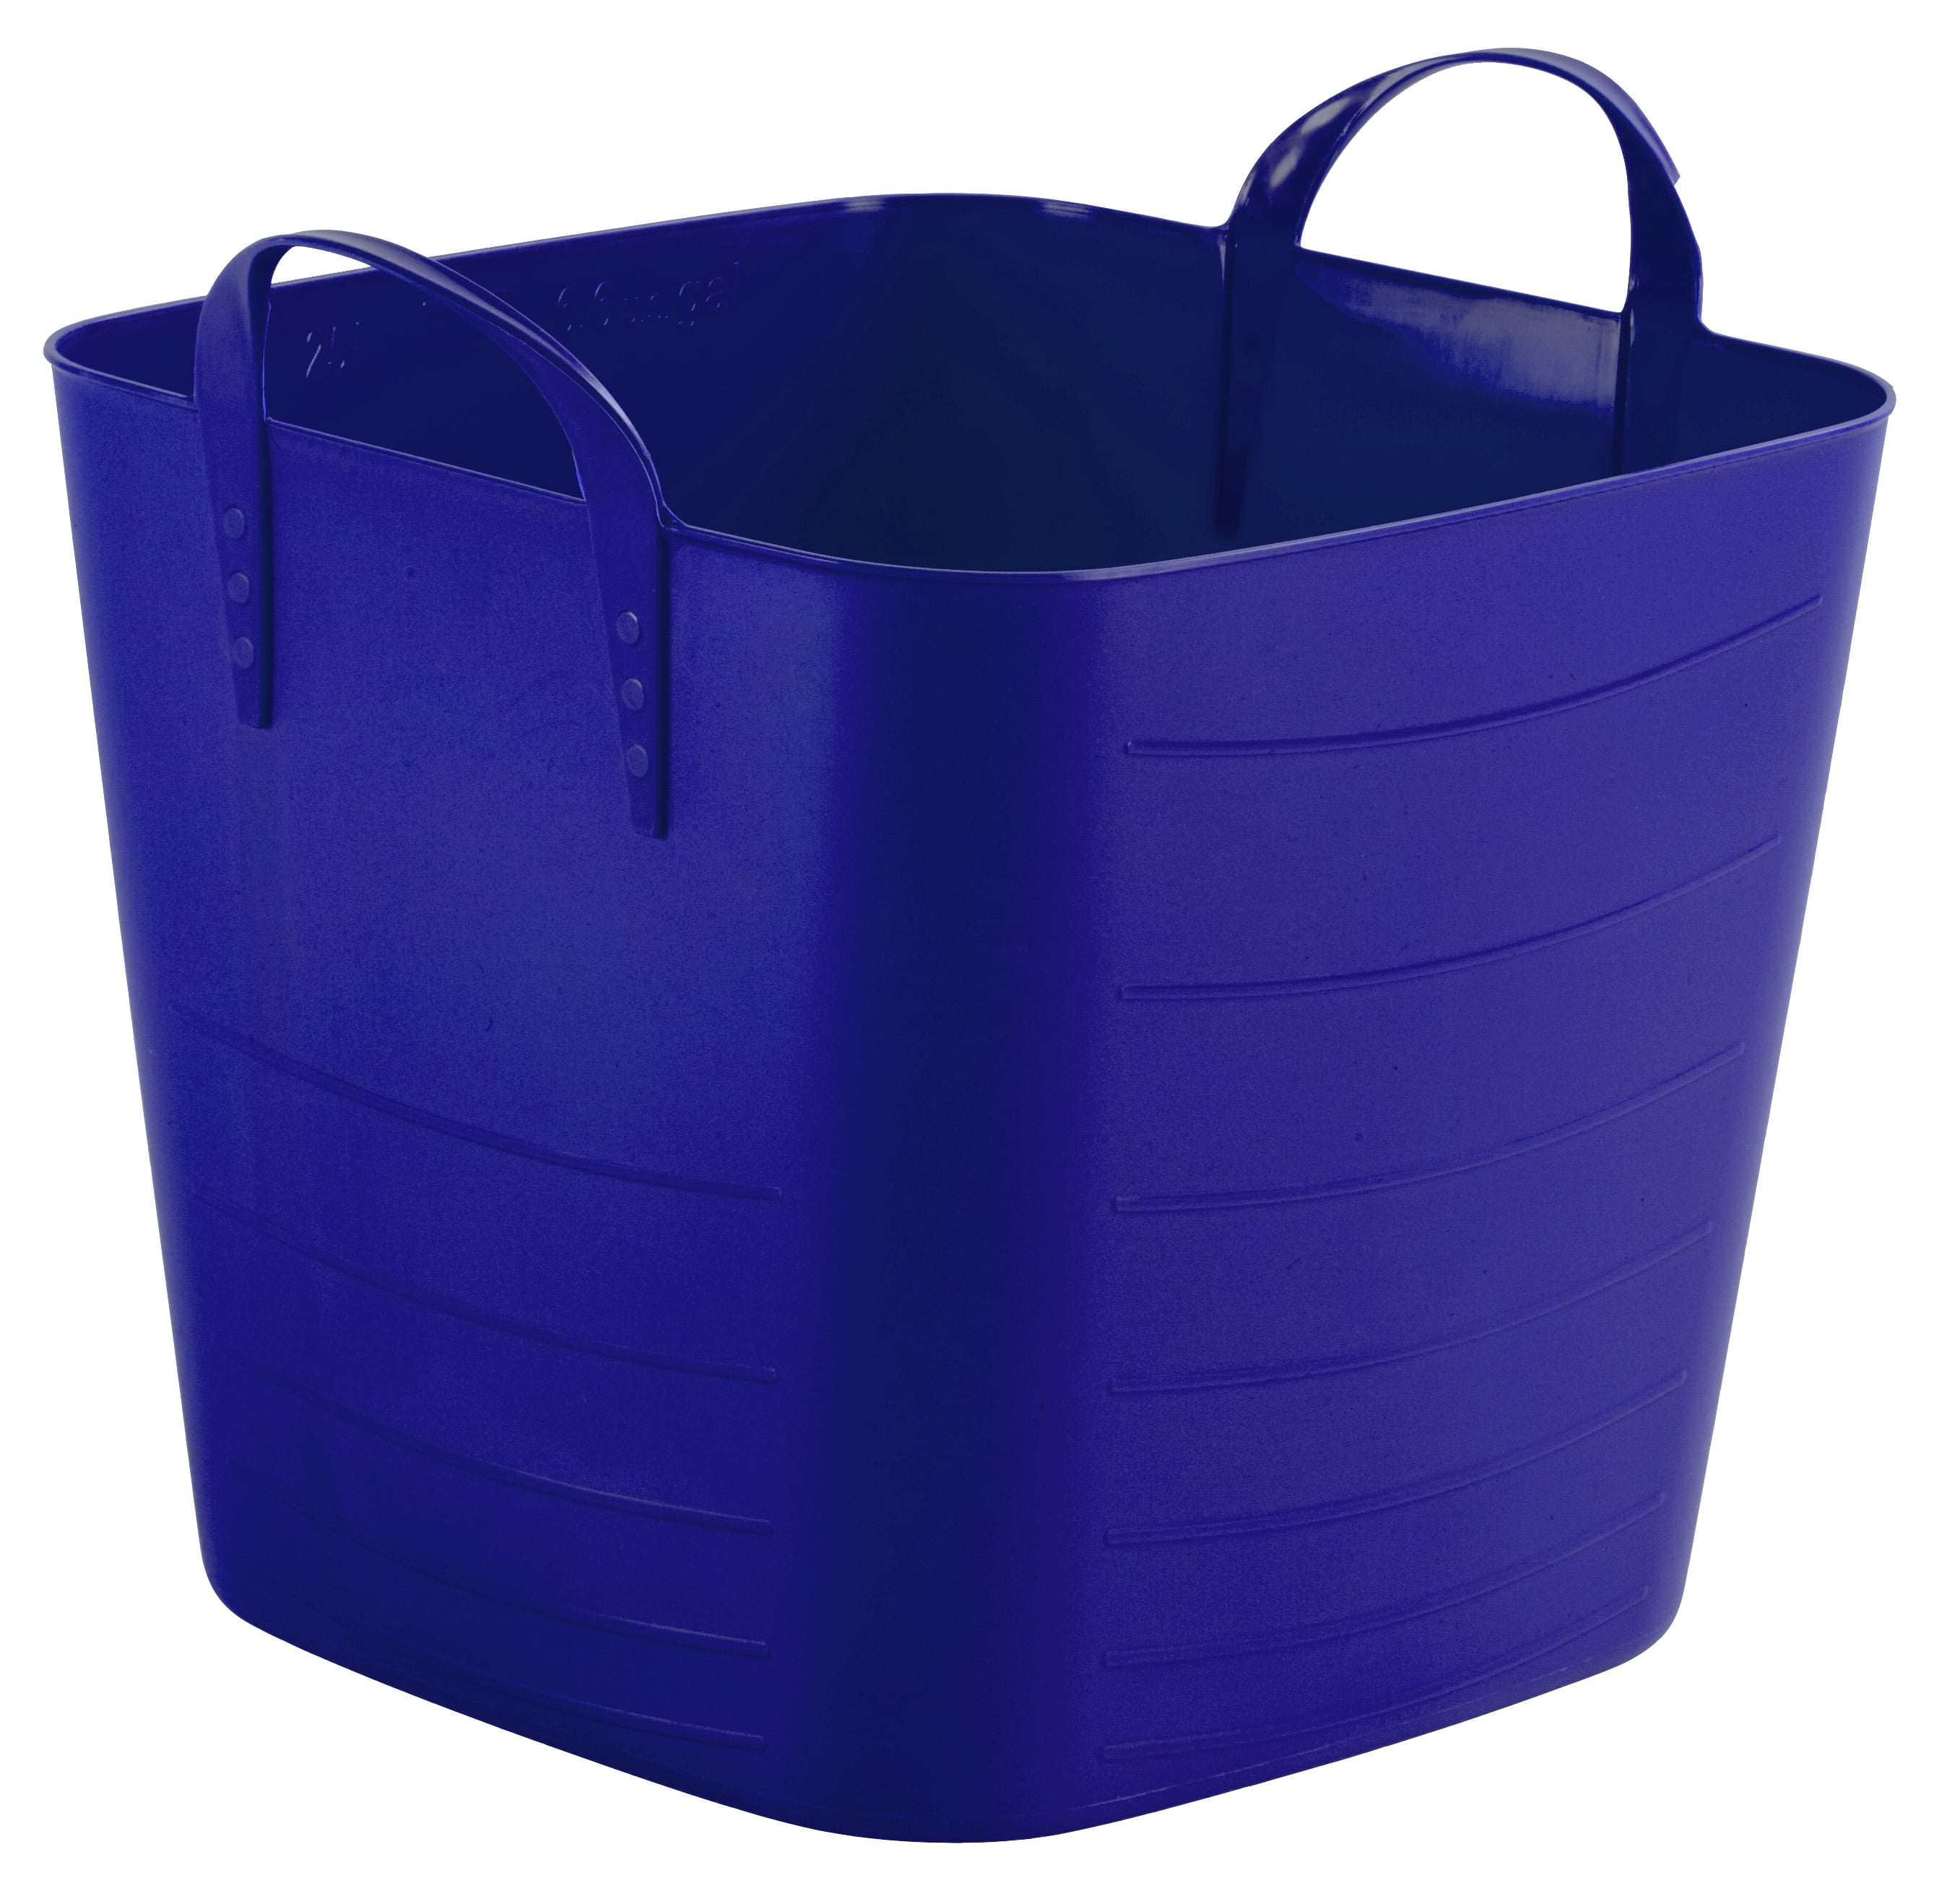 Your Zone 25-Liter Storage Tub - Blue, Flexible & Extremely Strong